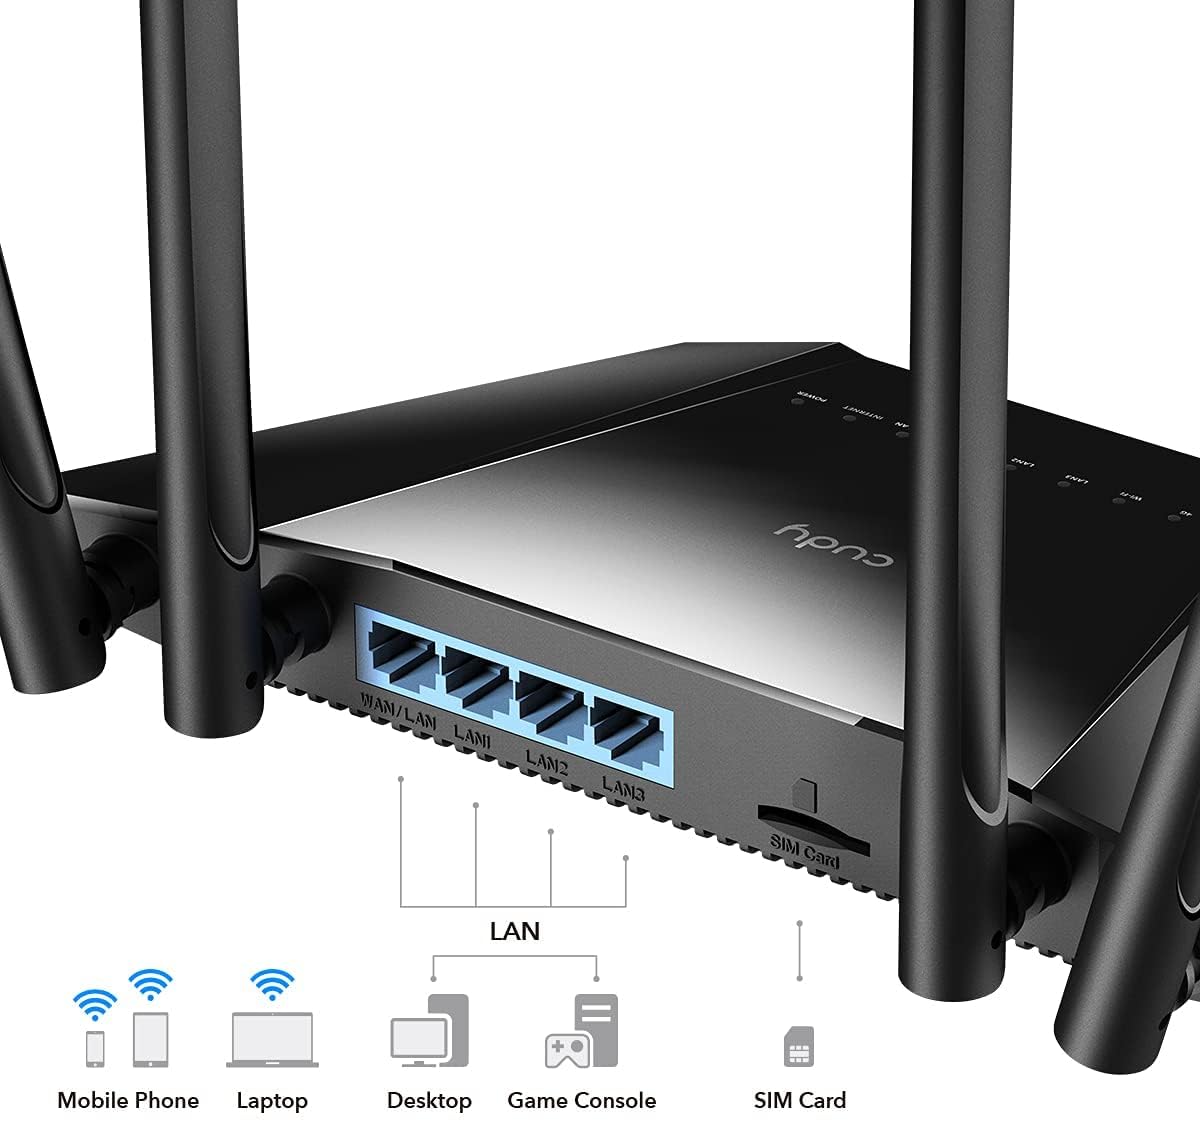 Cudy N300 WiFi Unlocked 4G LTE Modem Router with SIM Card Slot, 300Mbps WiFi, LTE Cat4, EC25-AFX Qualcomm Chipset, 5dBi High Gain Antennas, FDD, DDNS, VPN, Cloudflare, Plug and Play, LT400